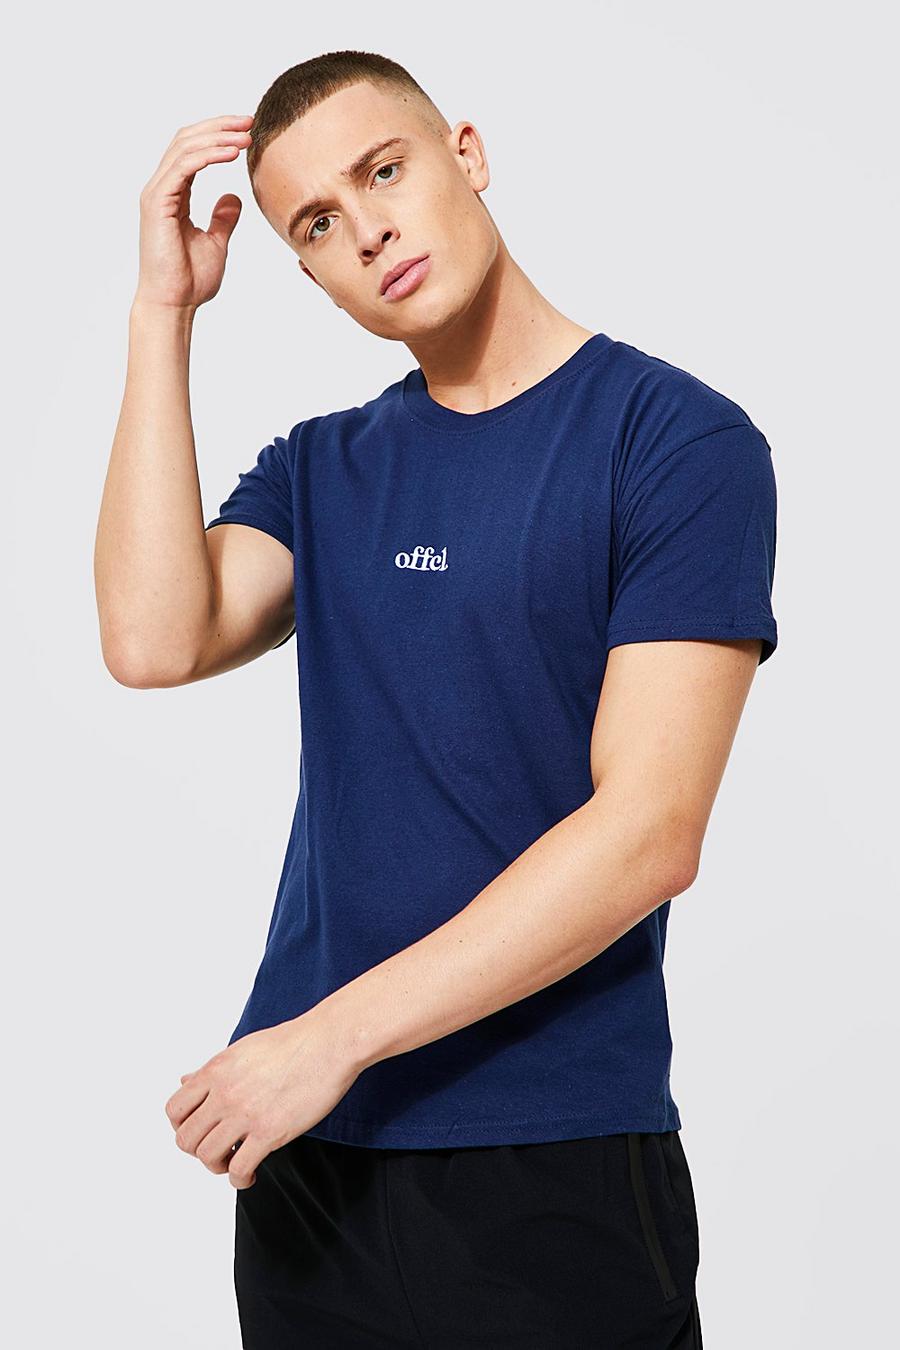 Navy Offcl Embroidered T-shirt 